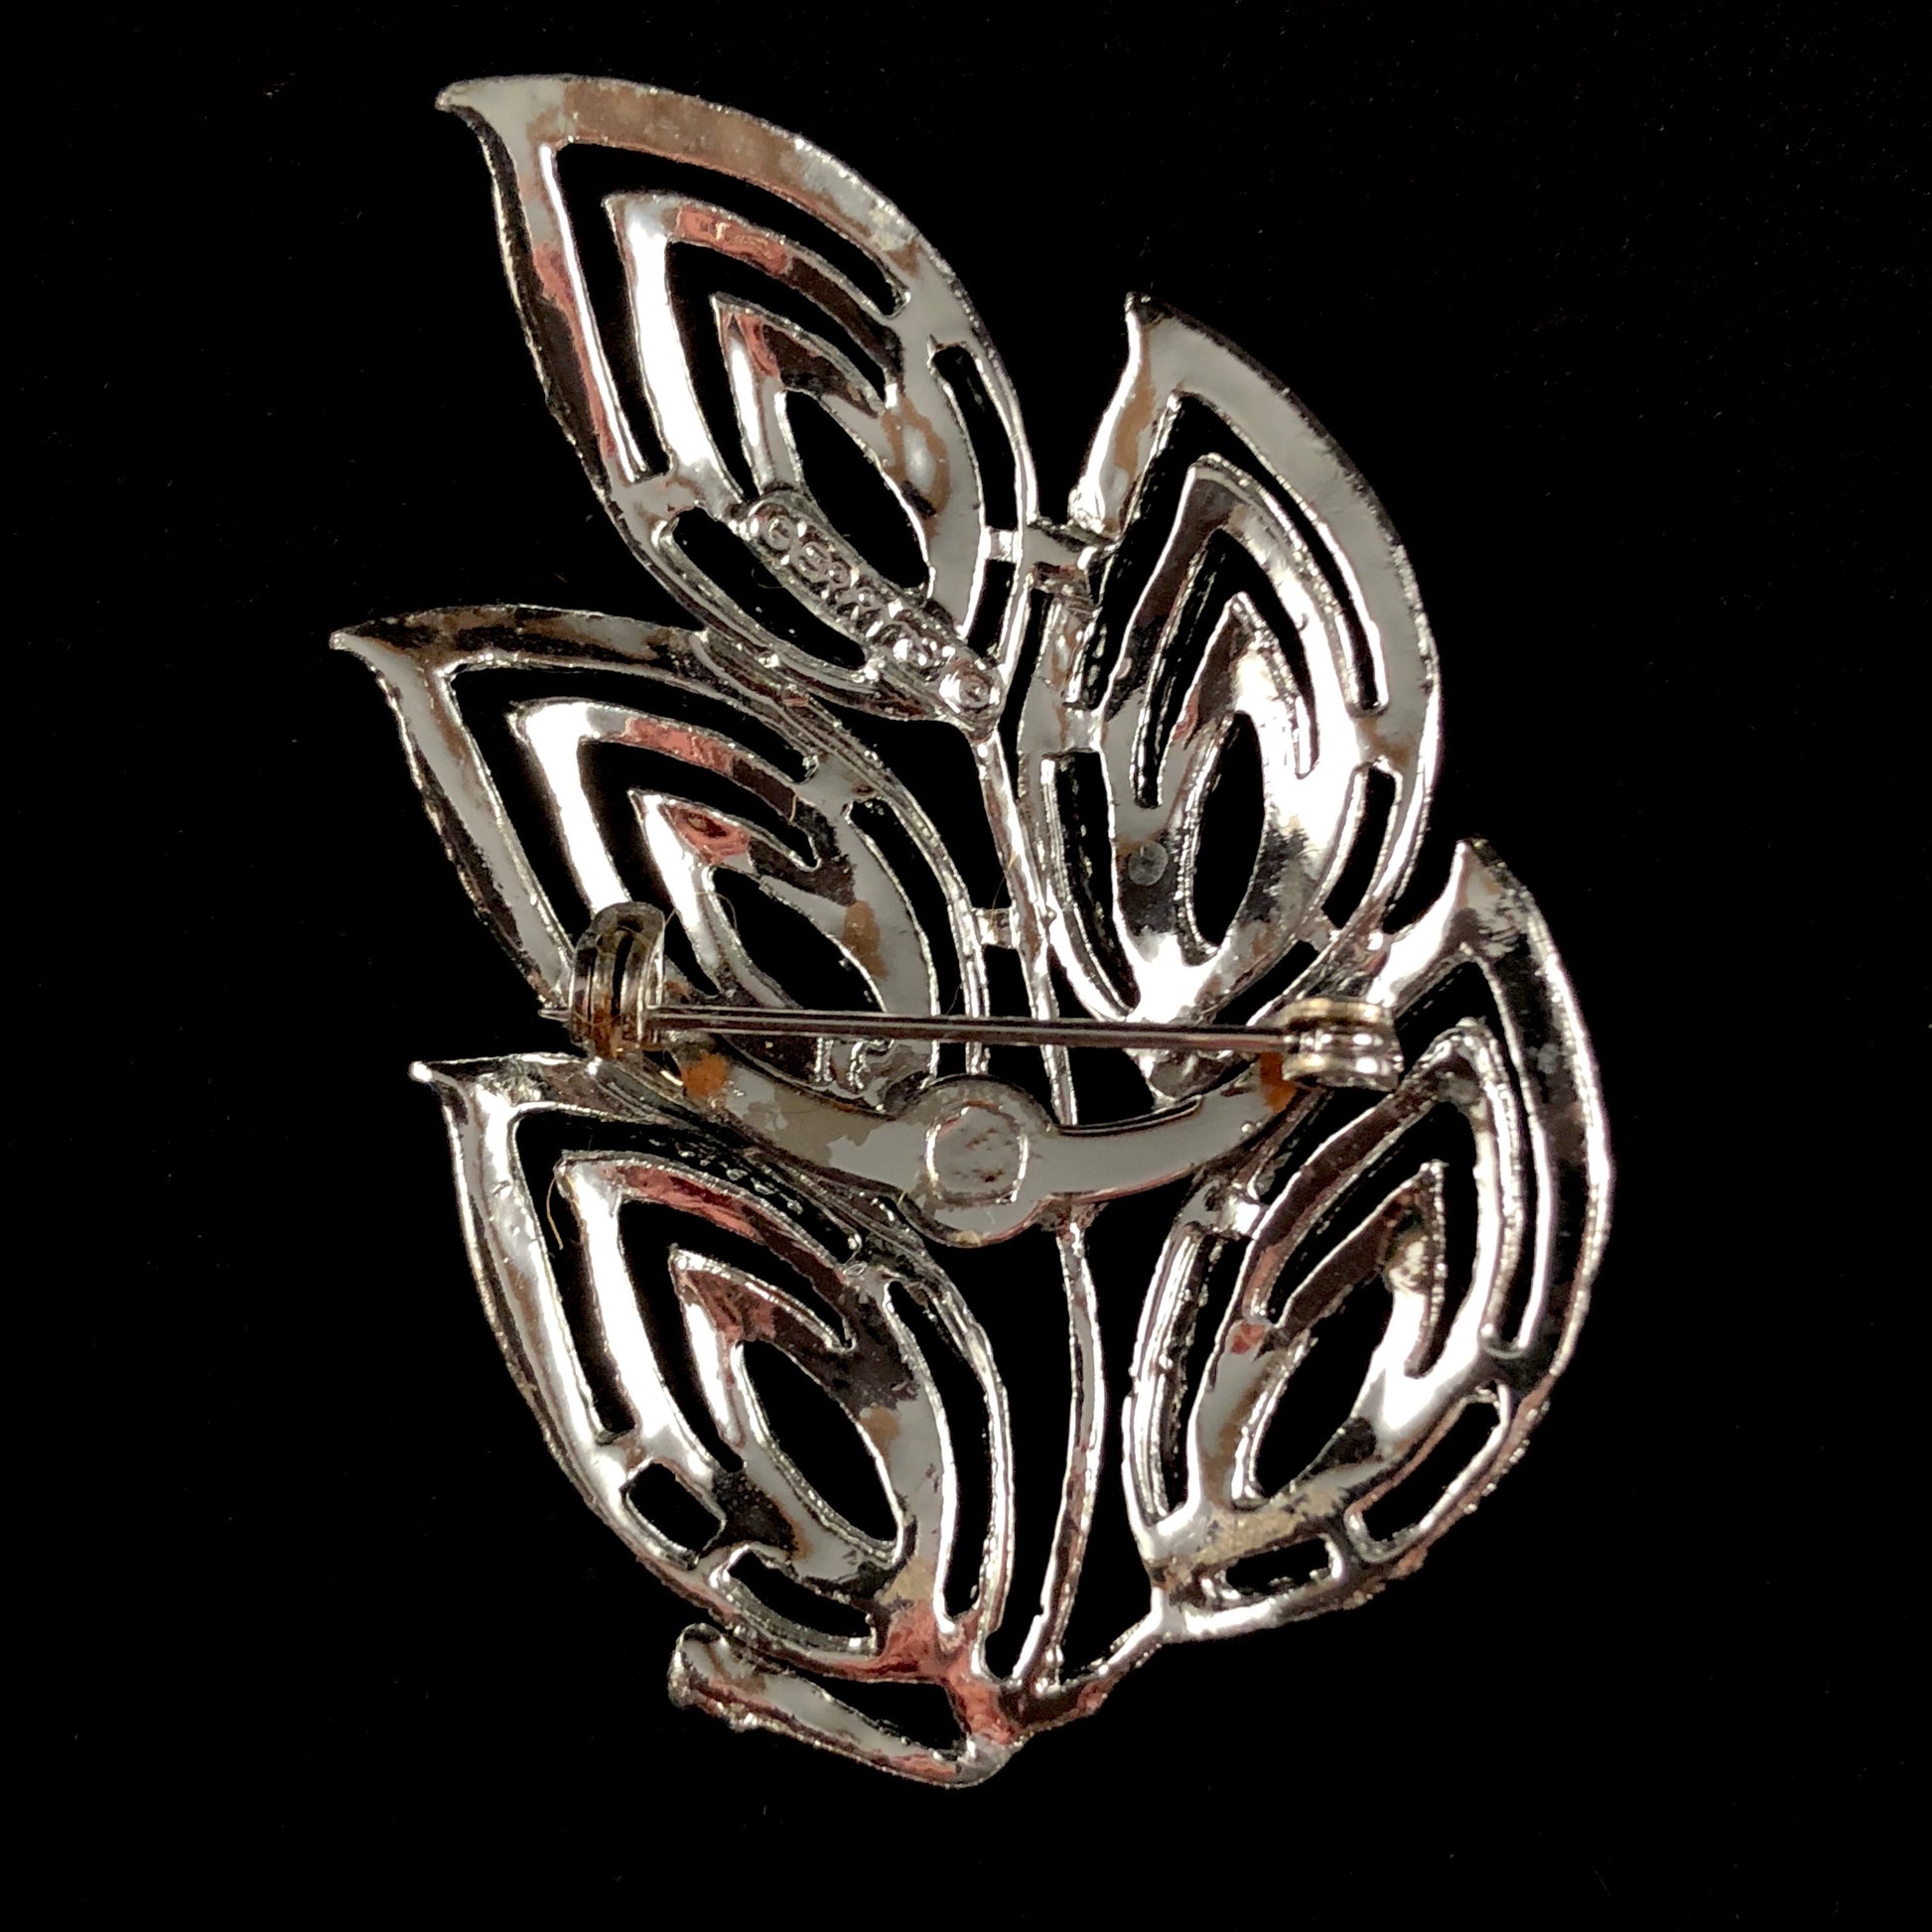 Late 60s/ Early 70s Gerry’s Silver Leaf Brooch - Retro Kandy Vintage